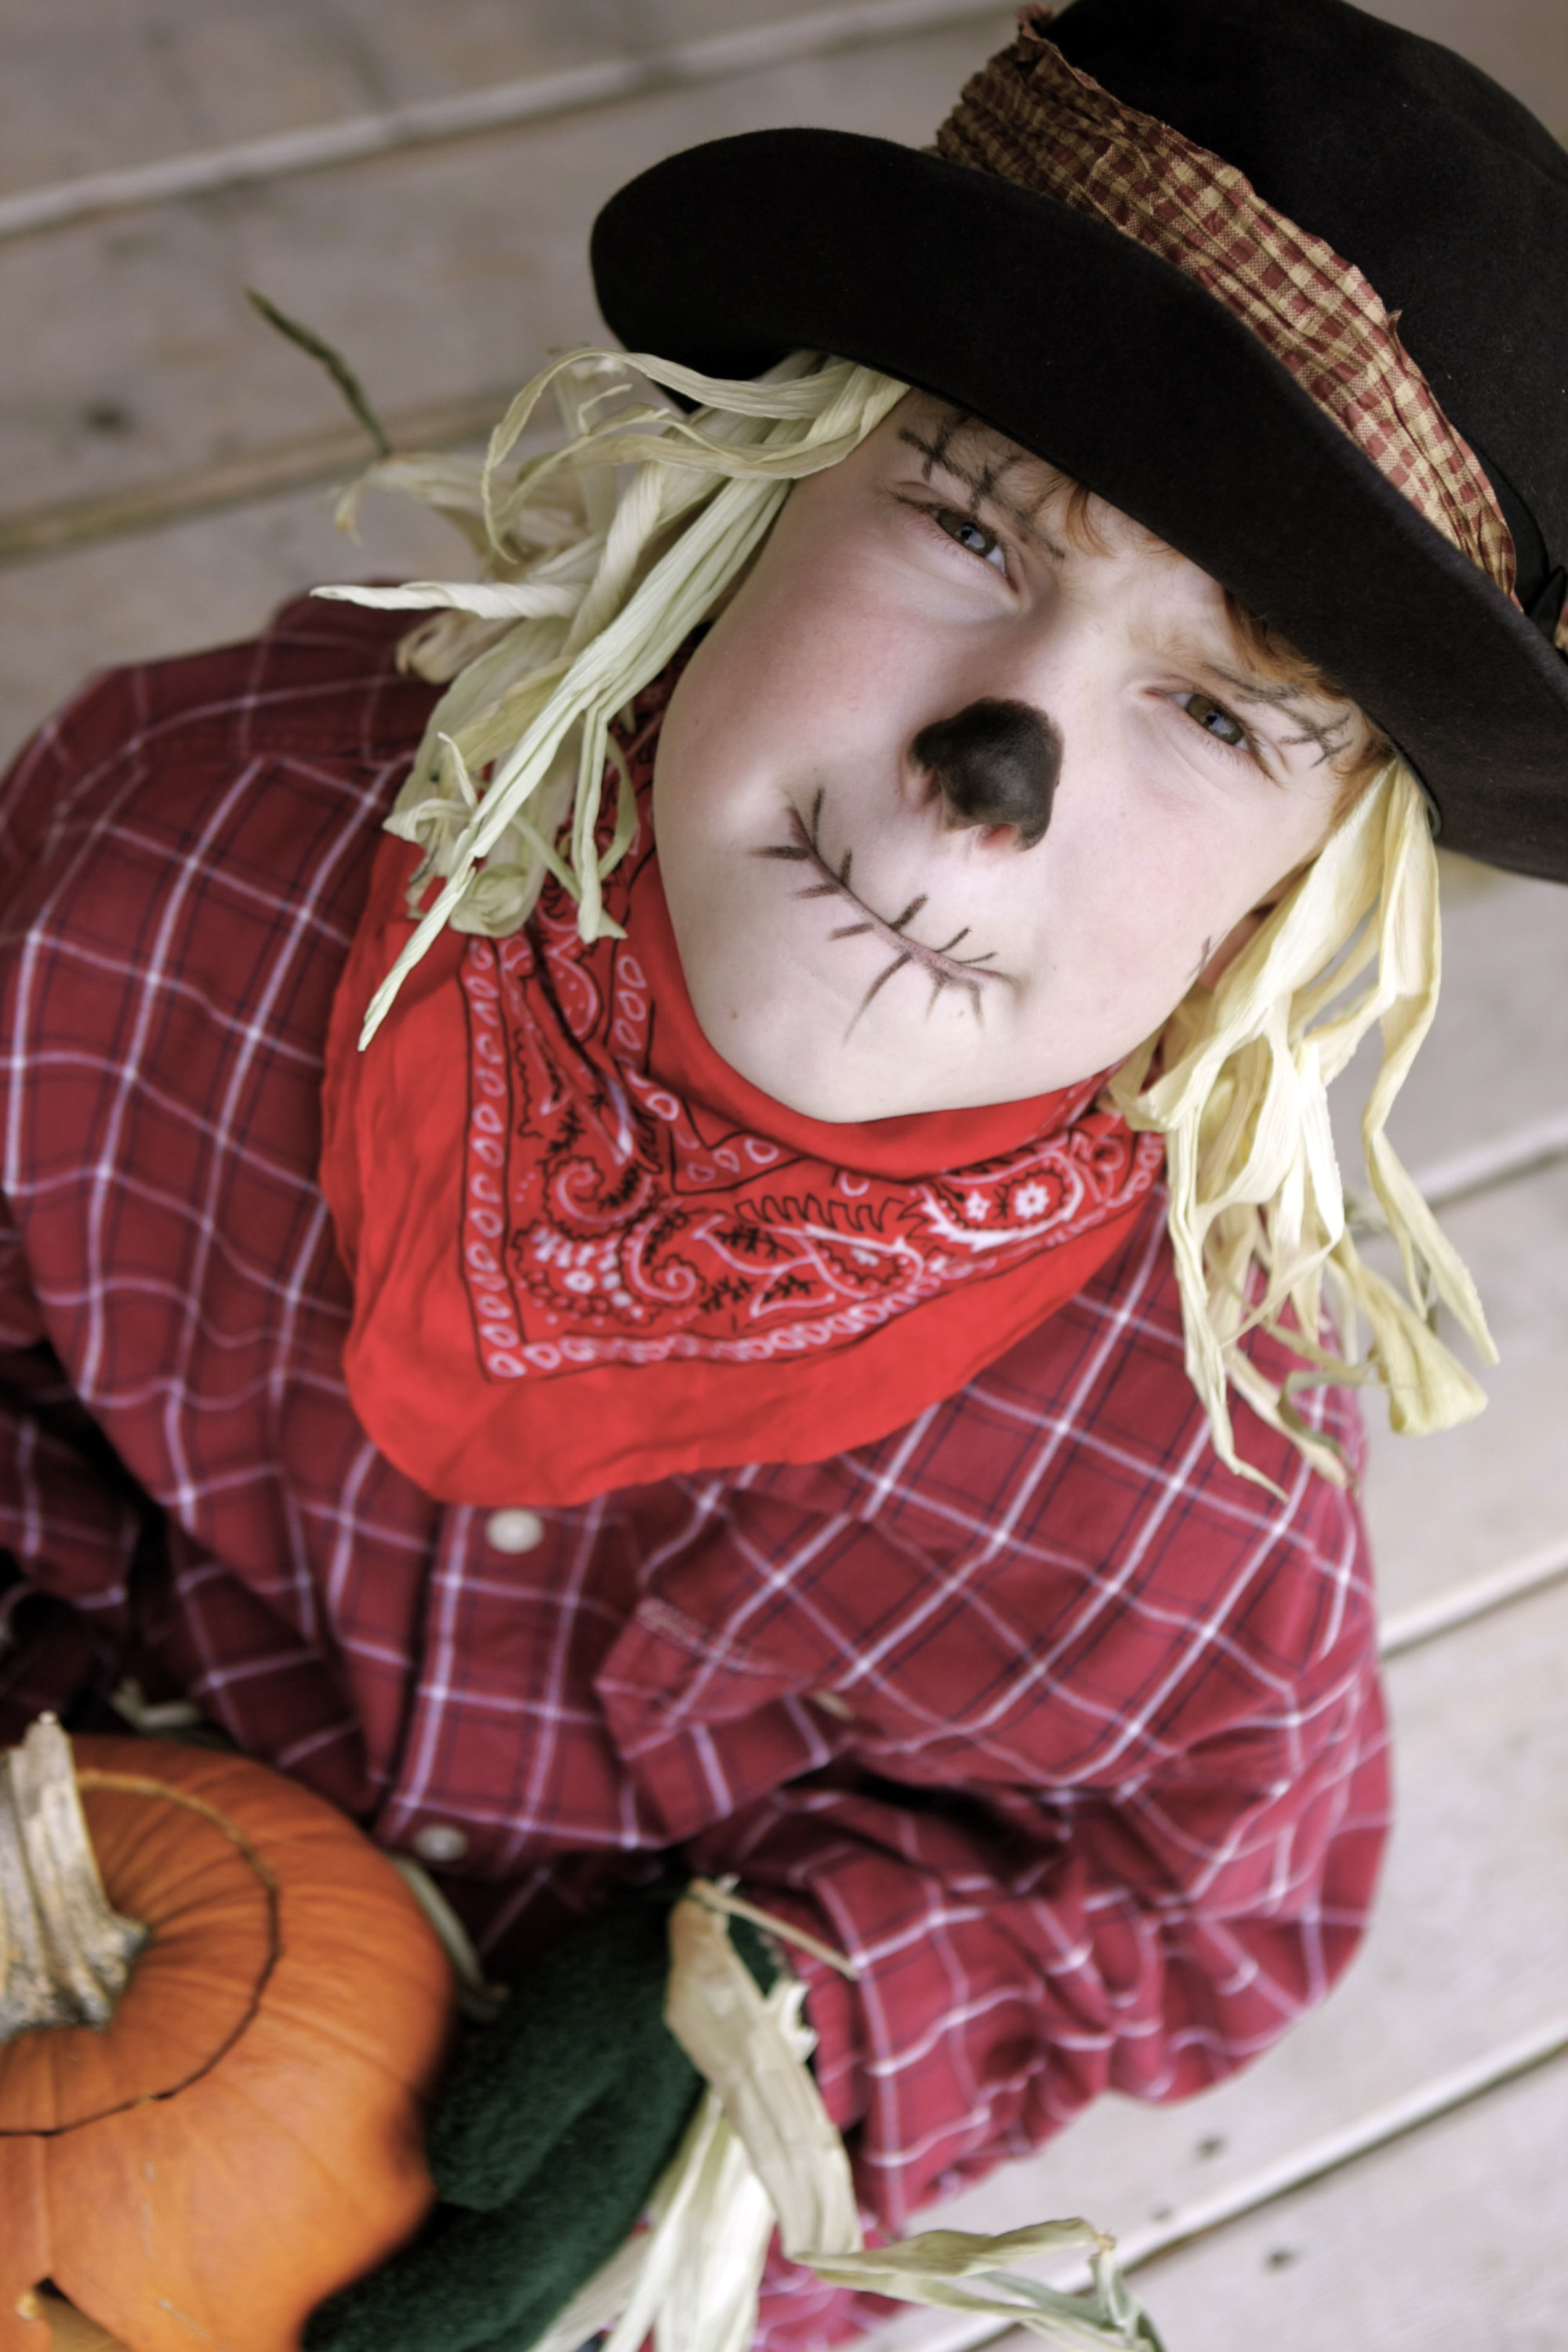 Little boy dresses up as a scarecrow for Halloween. Please view similar images in my portfolio.